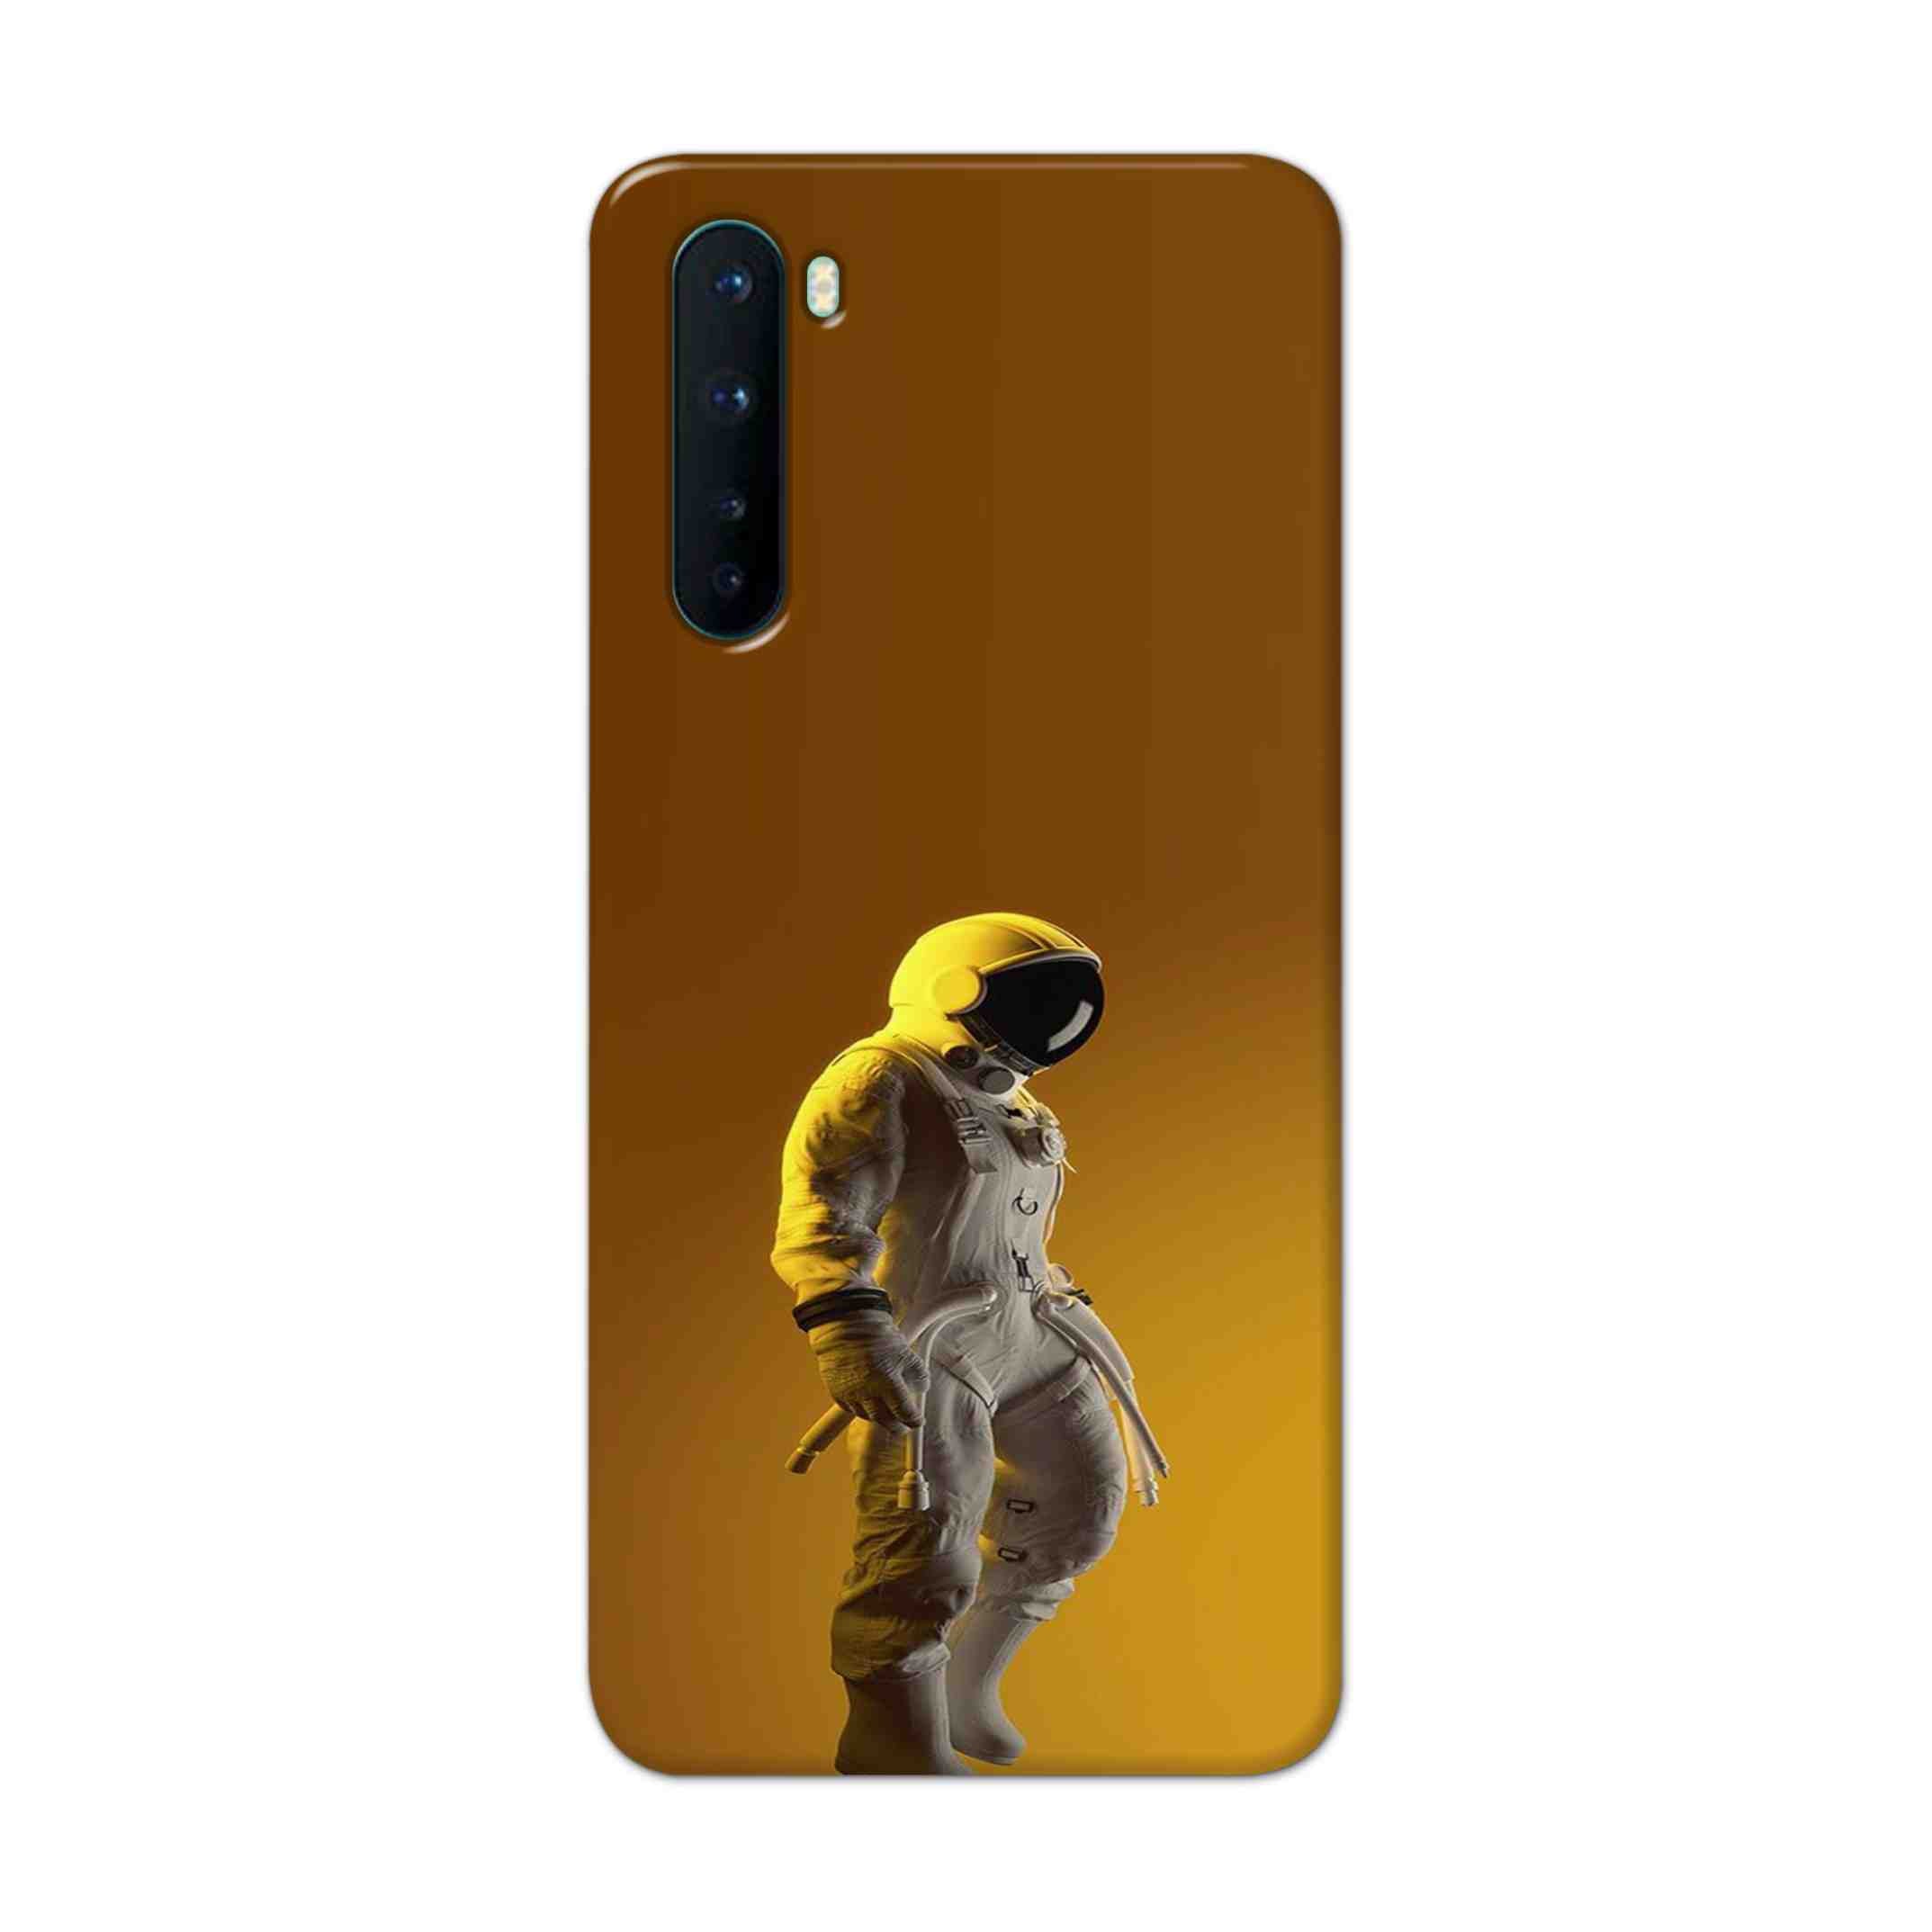 Buy Yellow Astronaut Hard Back Mobile Phone Case Cover For OnePlus Nord Online